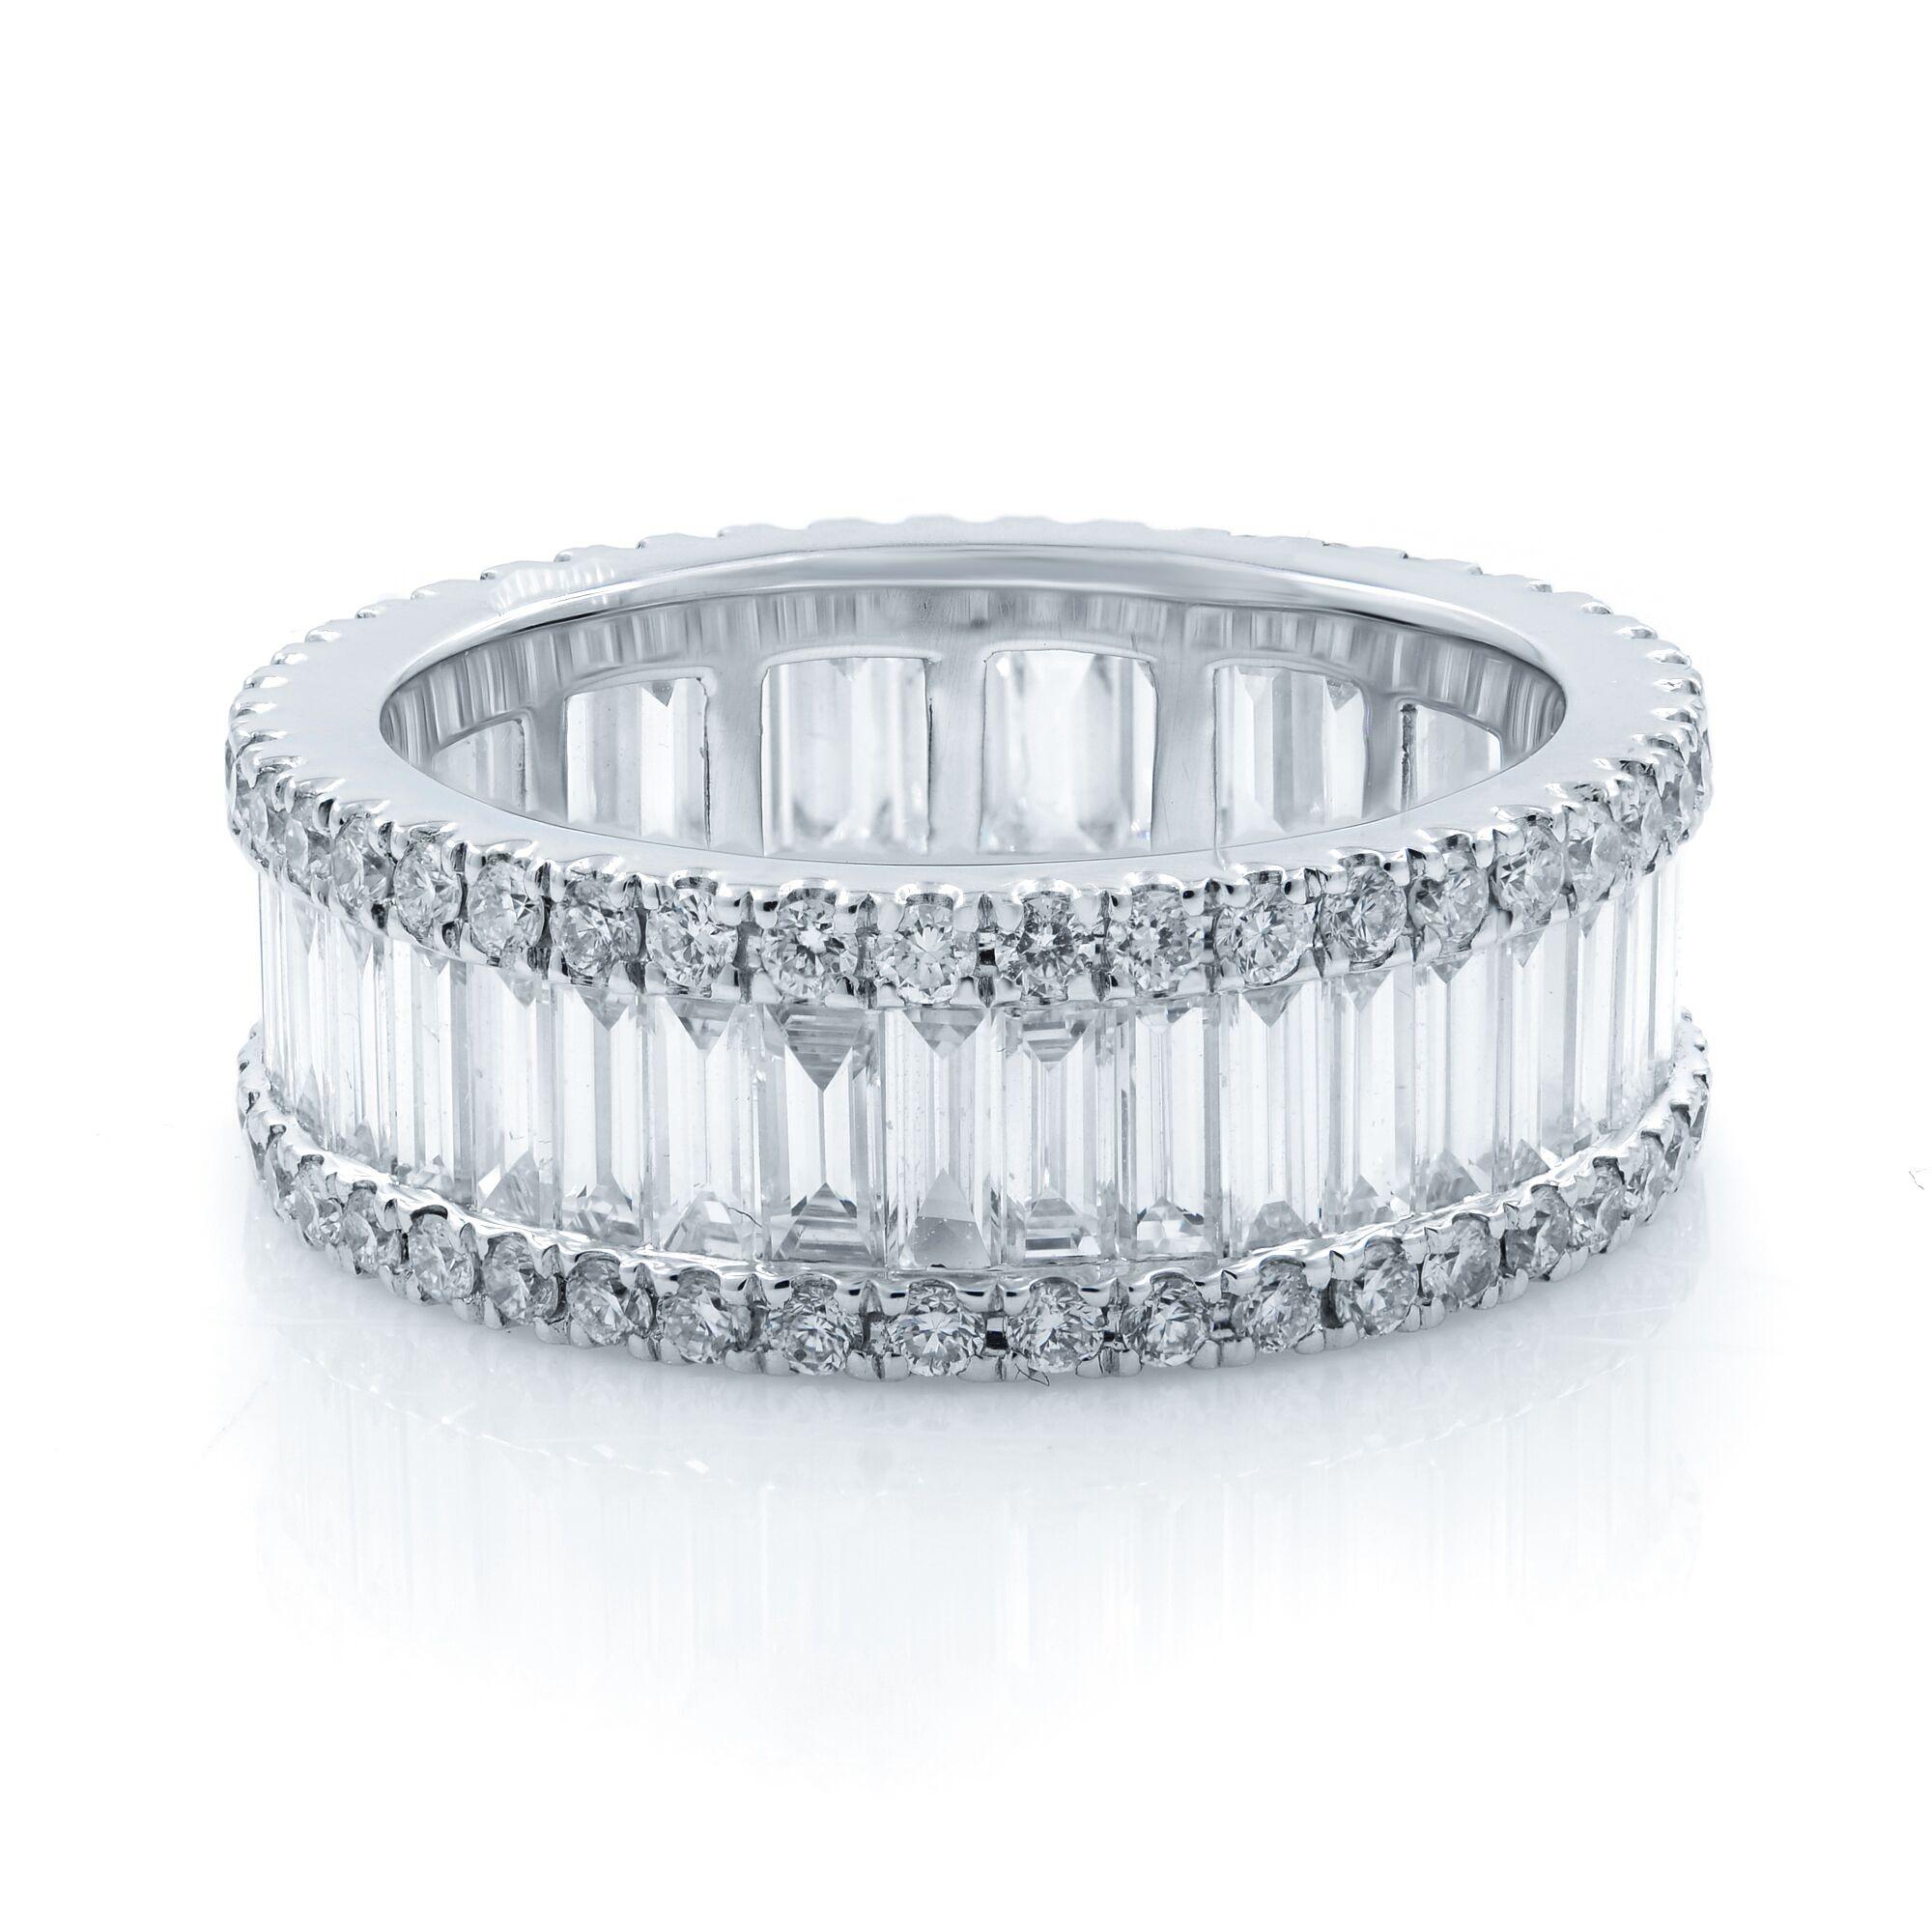 The channel set full eternity was crafted with hand selected baguette cut and round pave cut diamonds weighing 3.15 carats in total. Beautifully set in 18K white gold.
Ring weight 5.34 grams. Size 5.5. Ring width is 6.74mm. This is a stunting band,